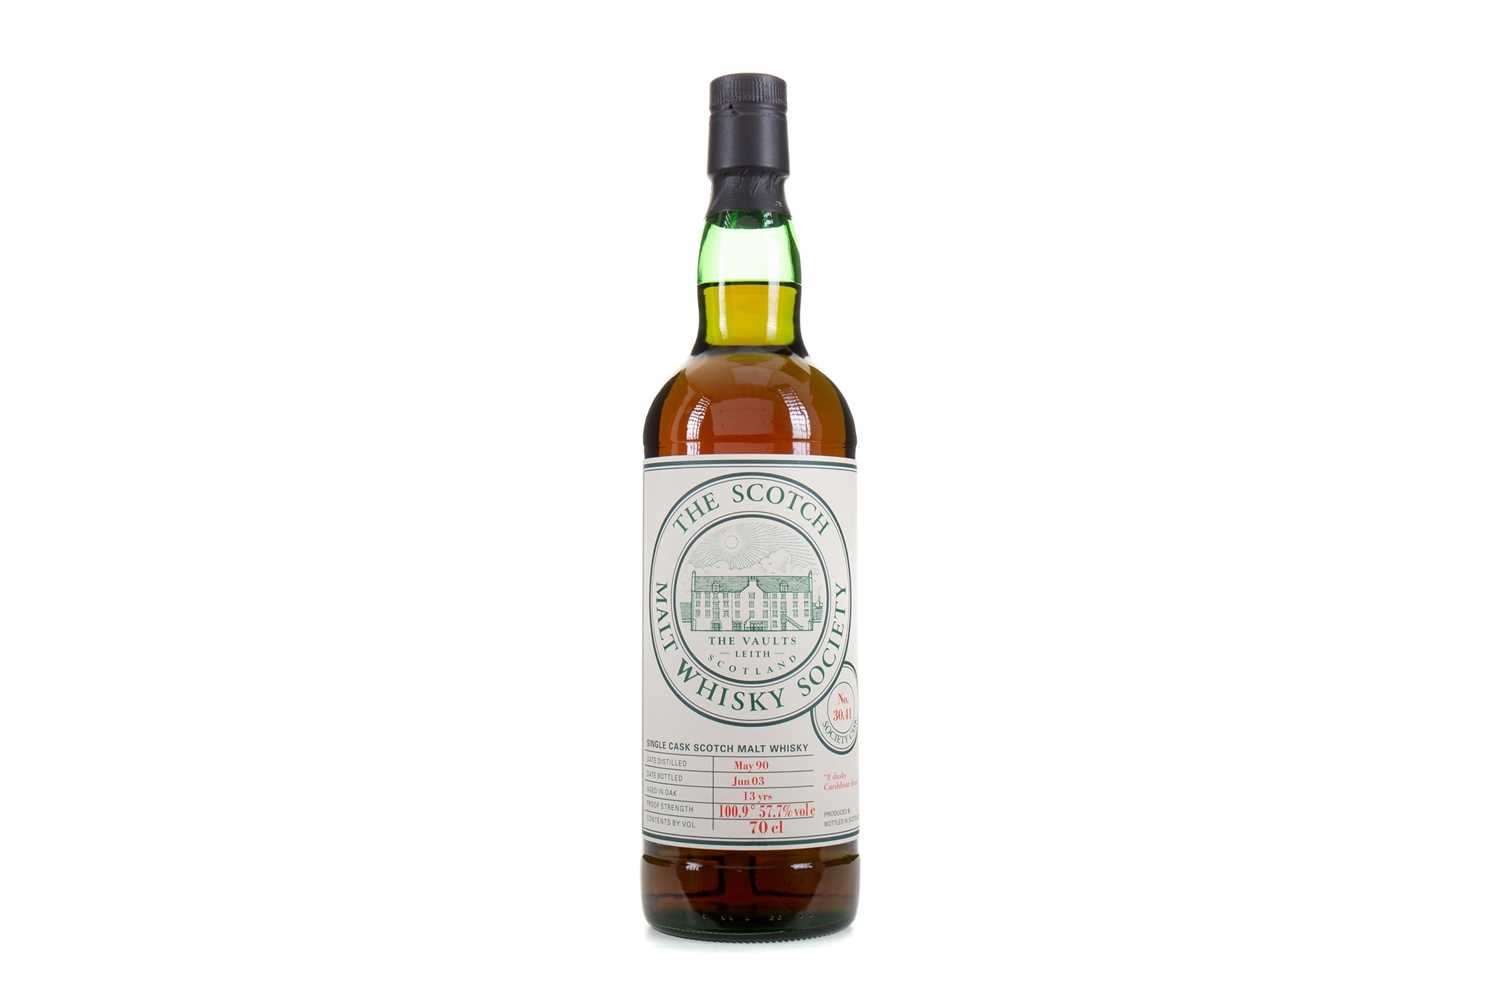 Lot 19 - SMWS 30.41 GLENROTHES 1990 13 YEAR OLD